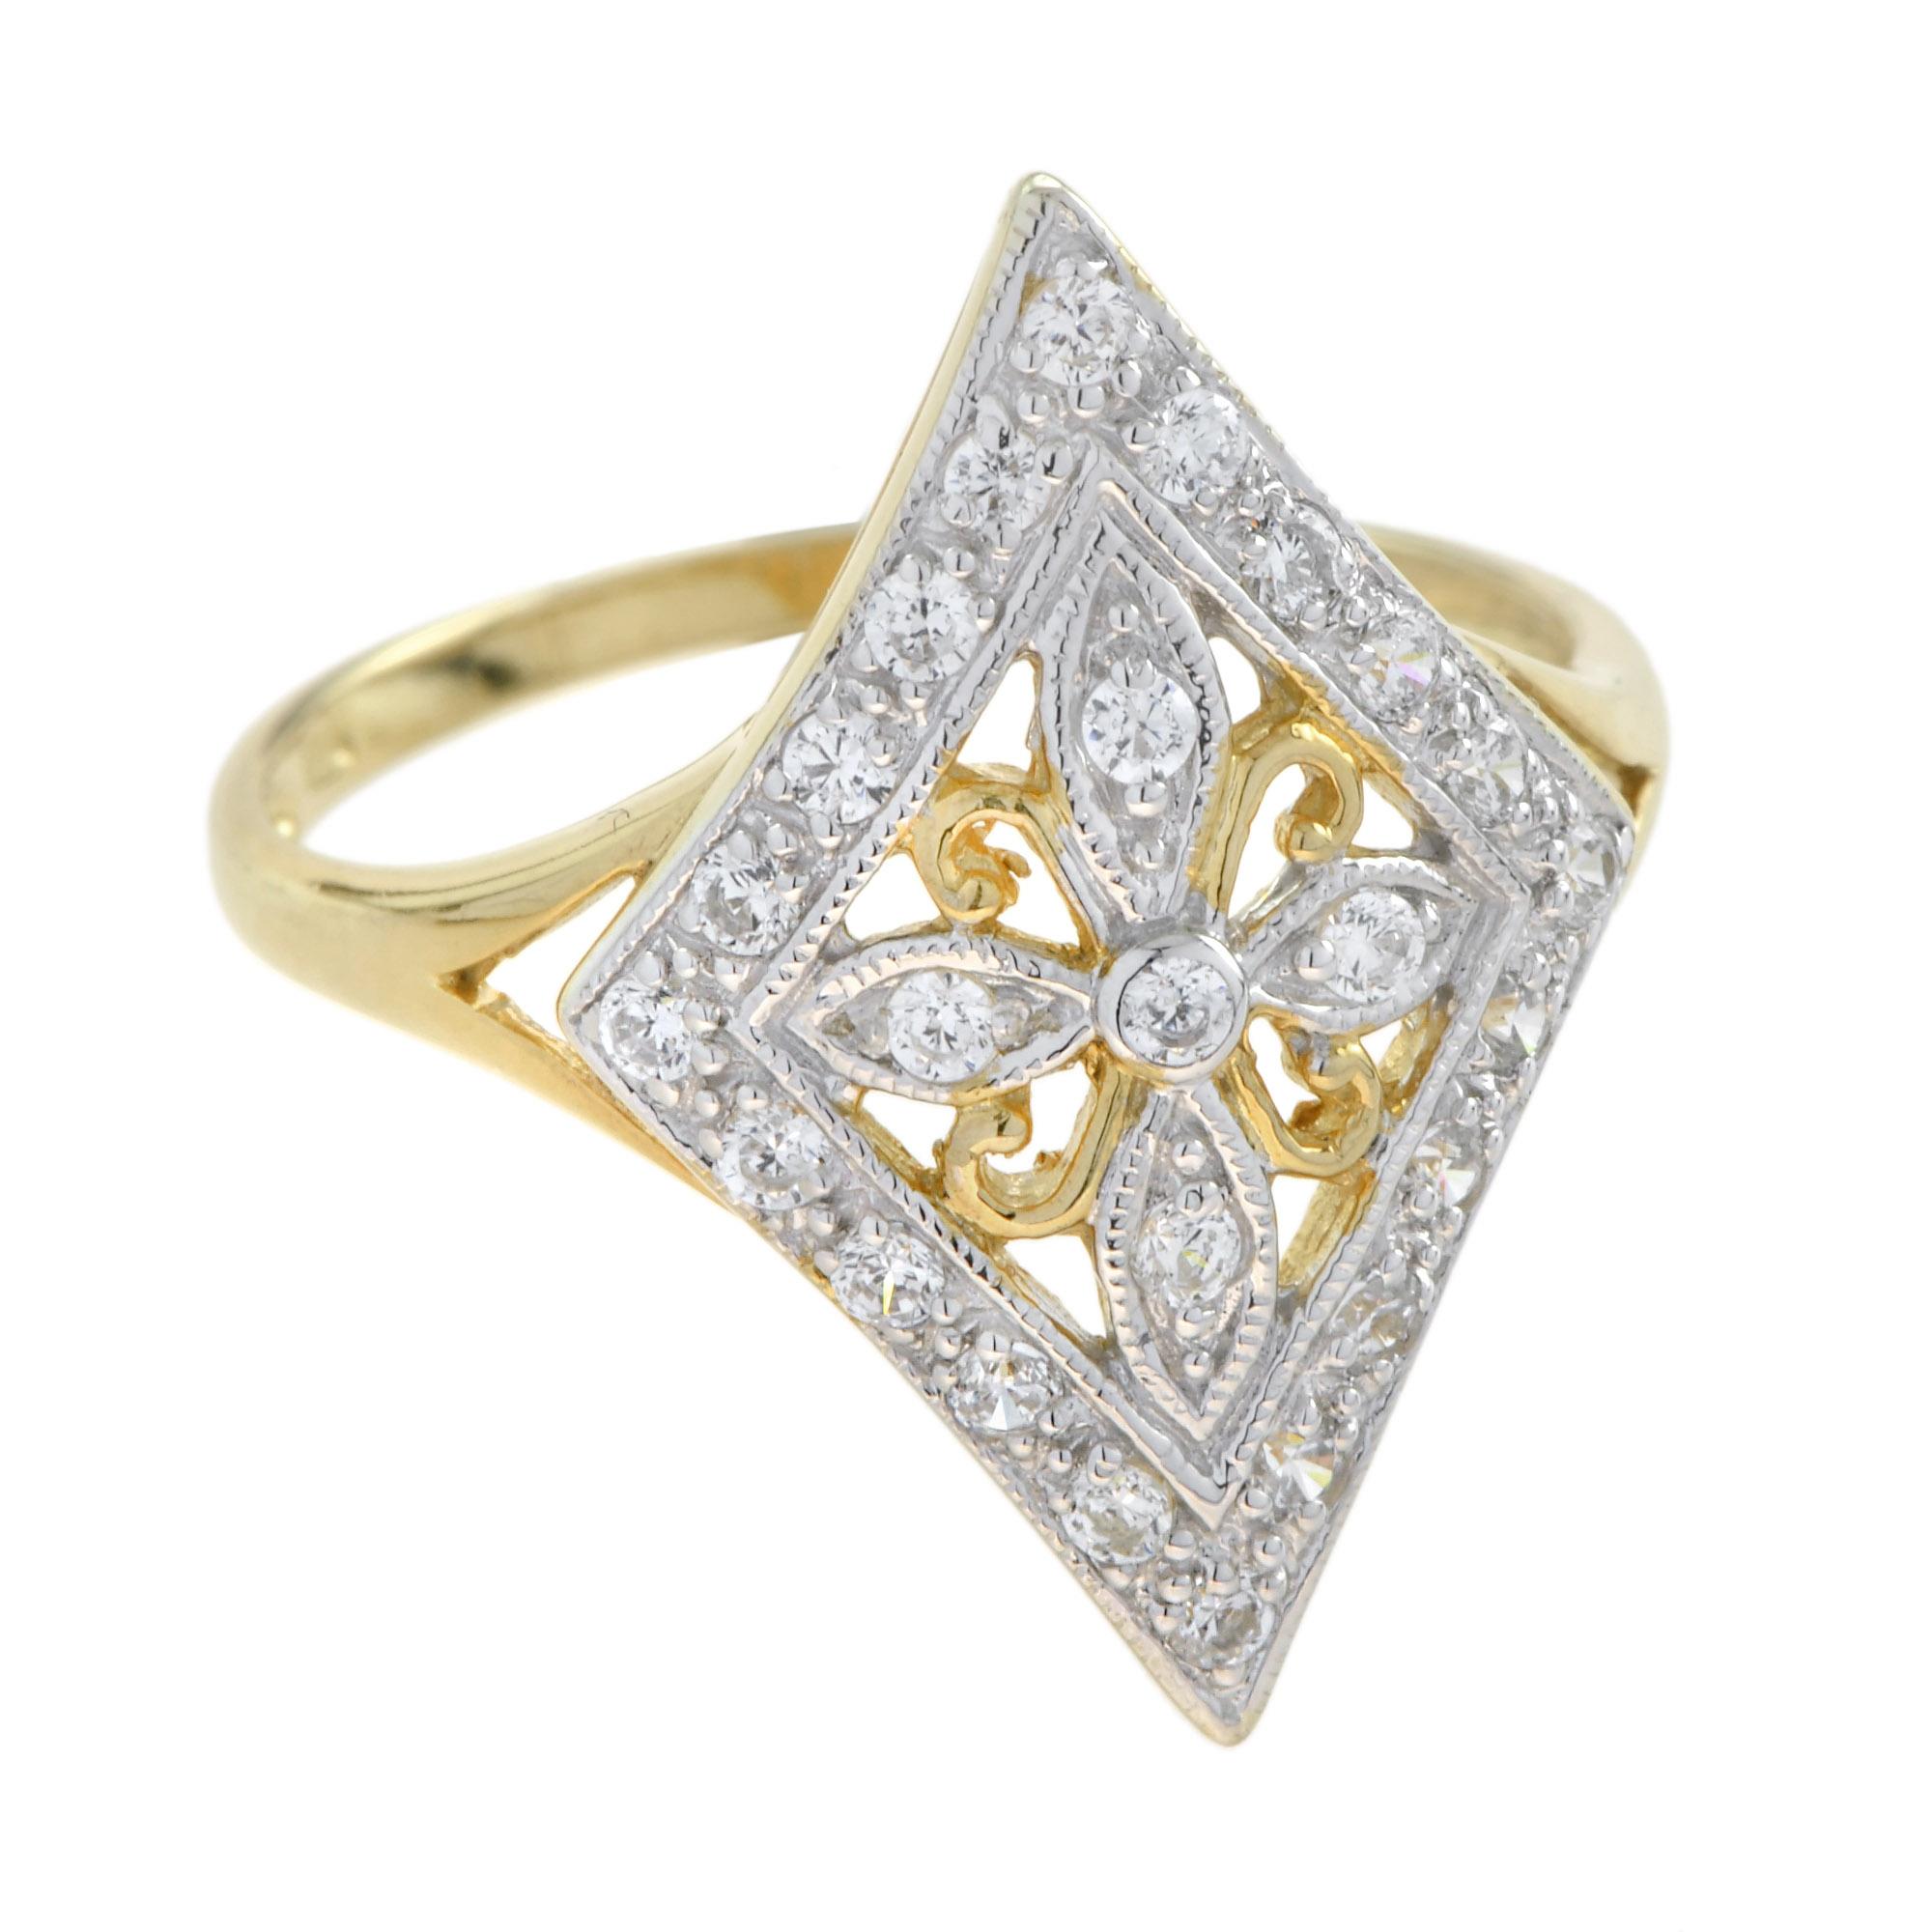 For Sale:  Vintage Style Diamond Floral Filigree Ring in 14K Yellow Gold 2